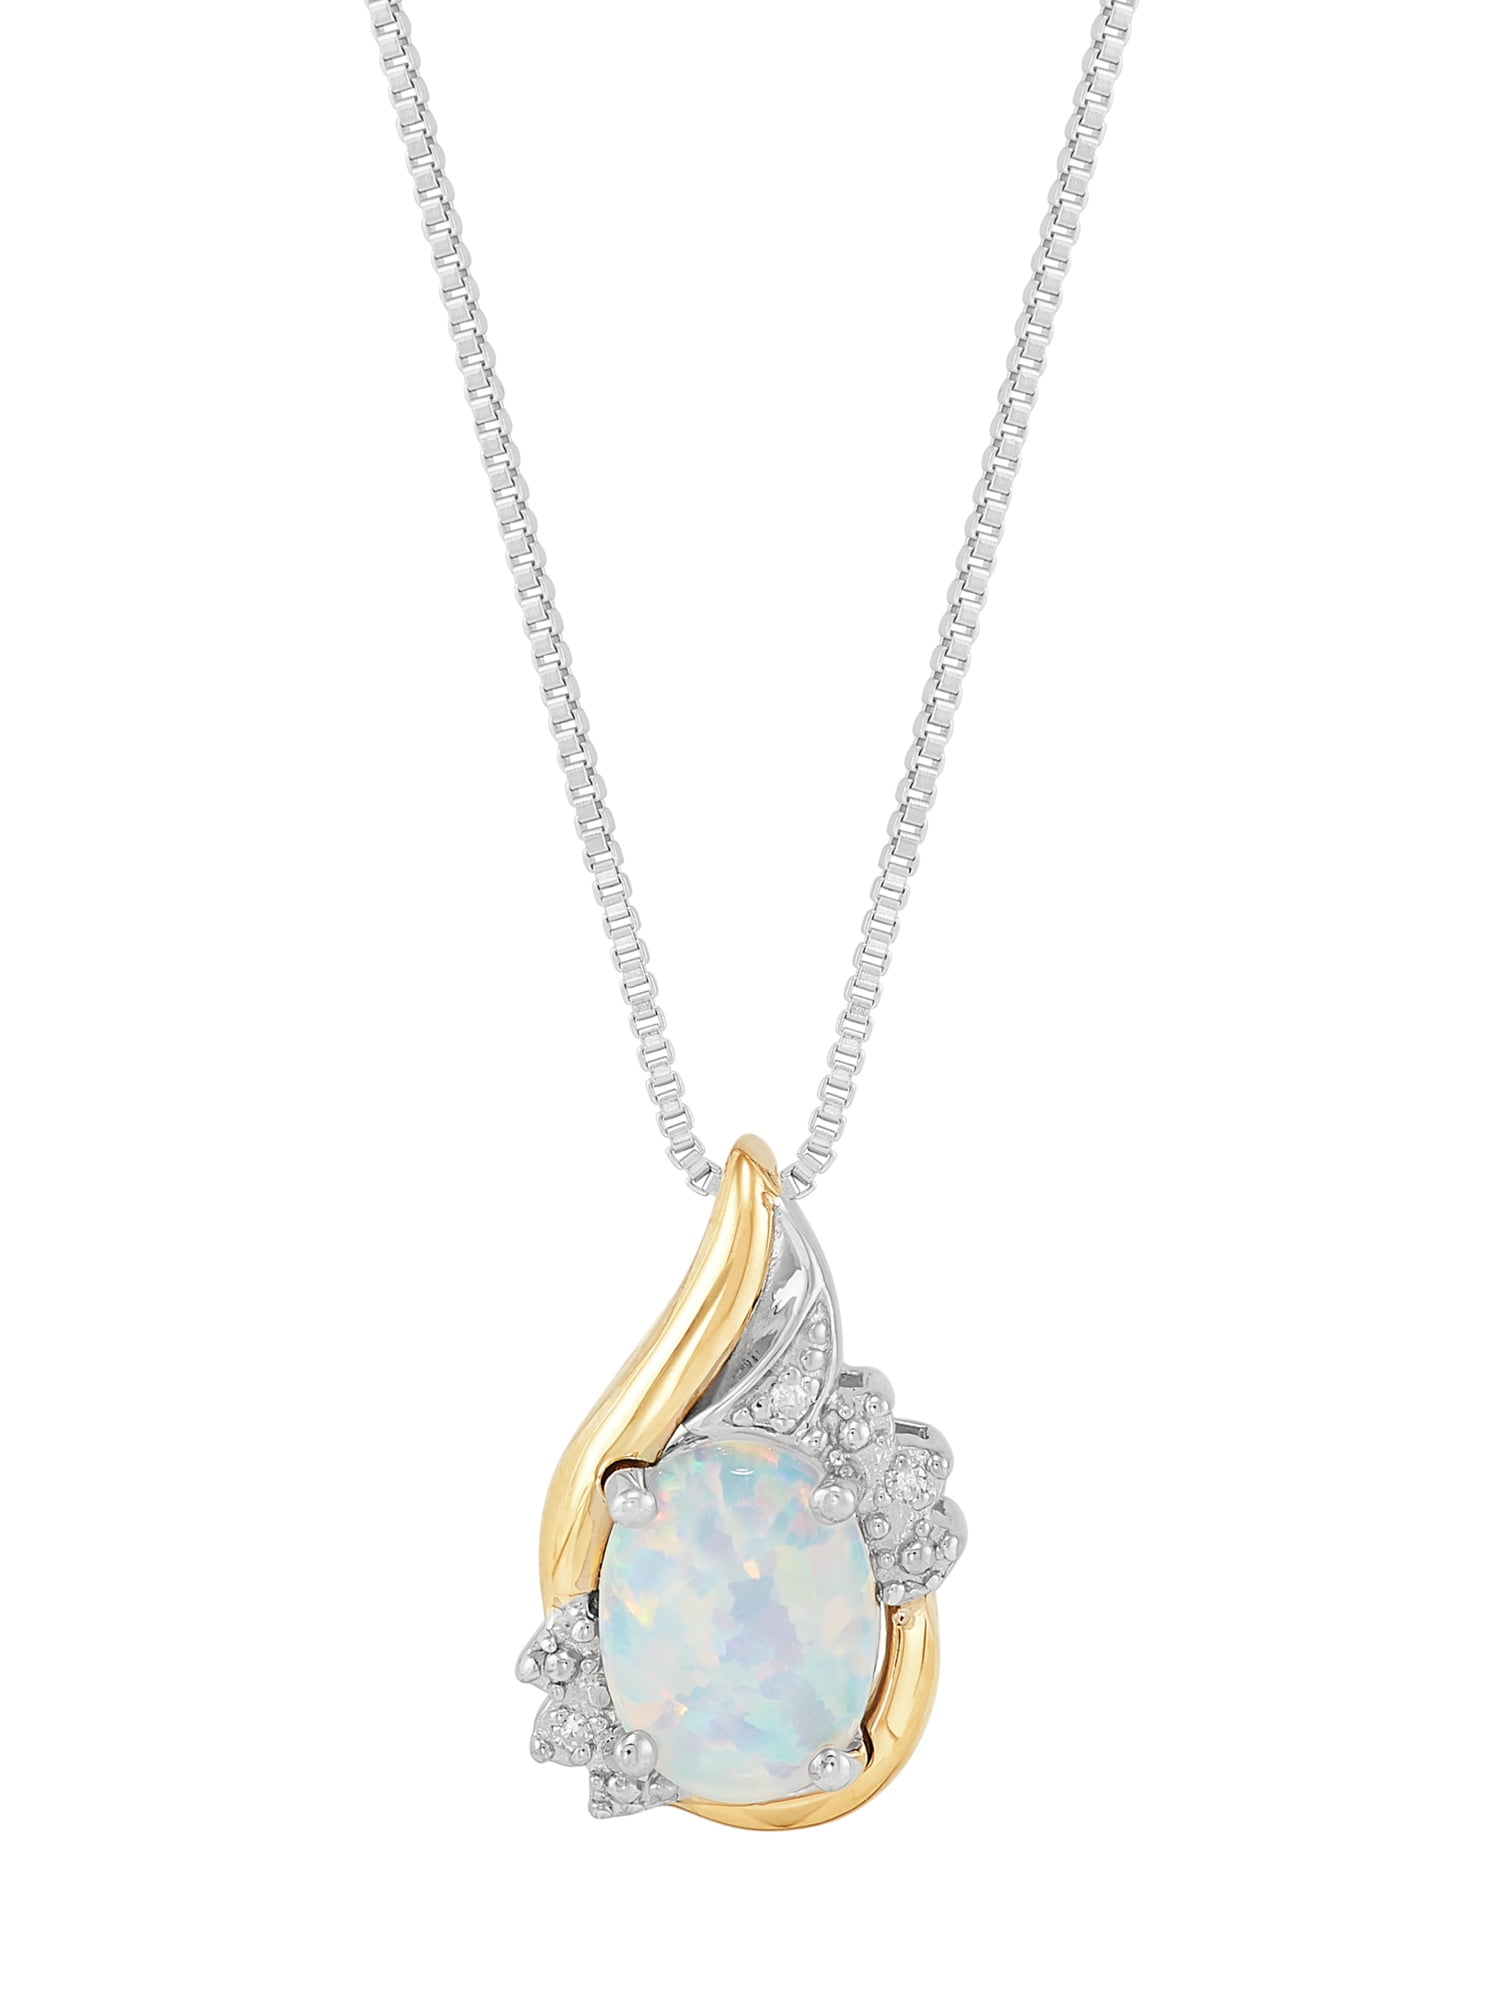 Brilliance Fine Jewelry Created Opal Diamond Accent Necklace in Sterling Silver and 10kt Yellow Gold,18"